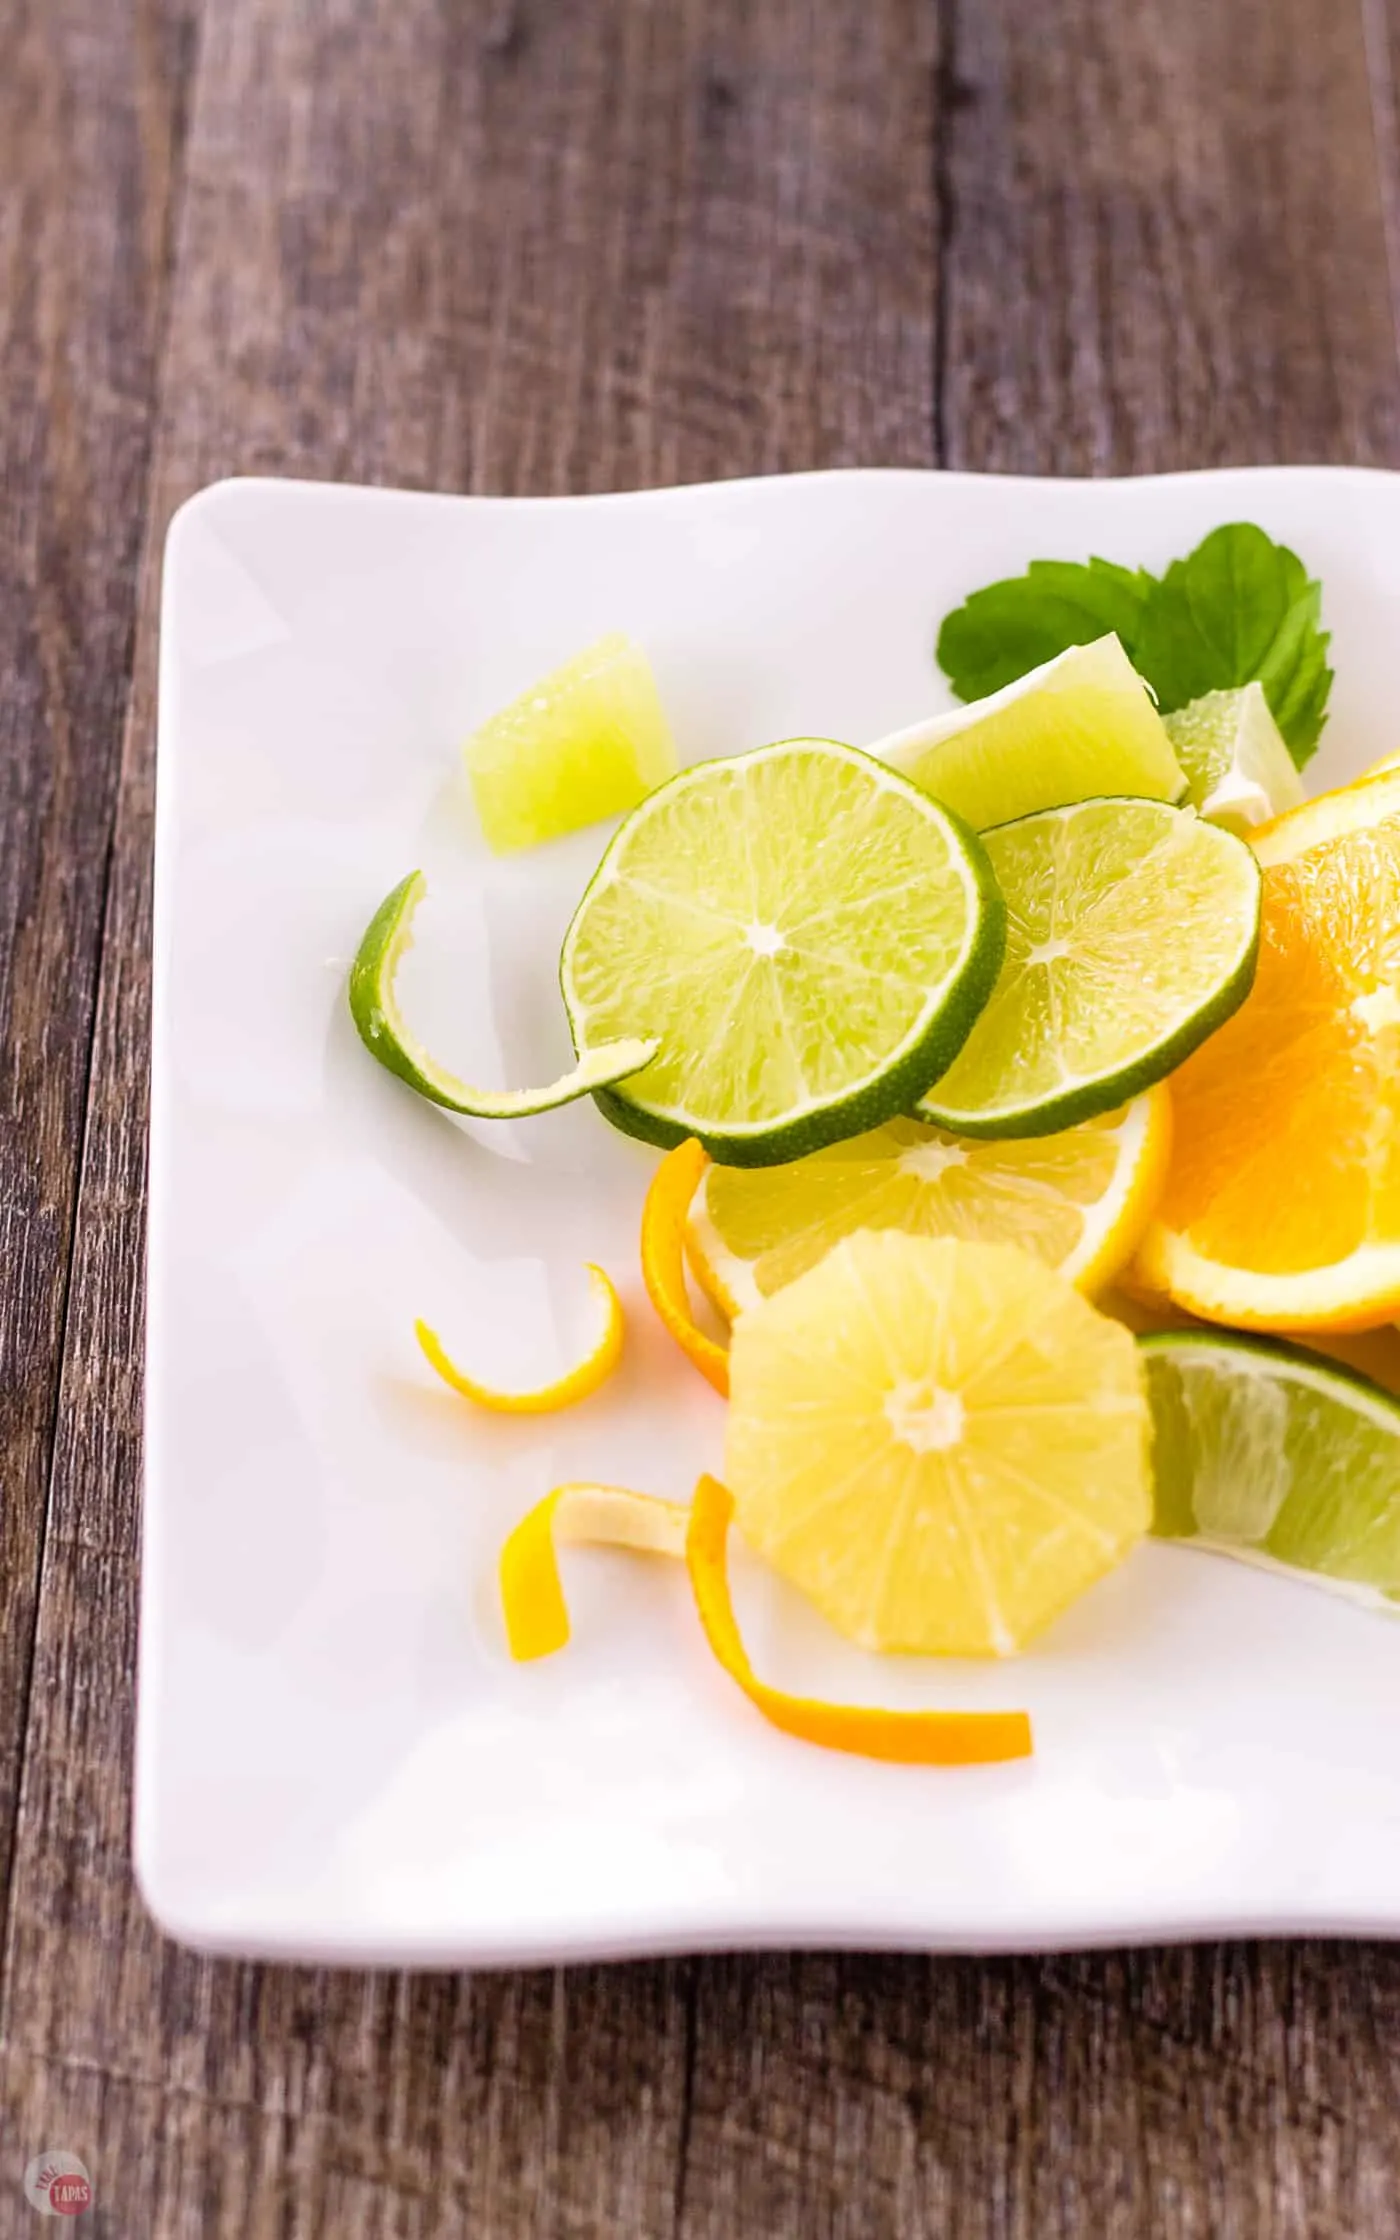 slices of Oranges, Lemons, Limes on a plate